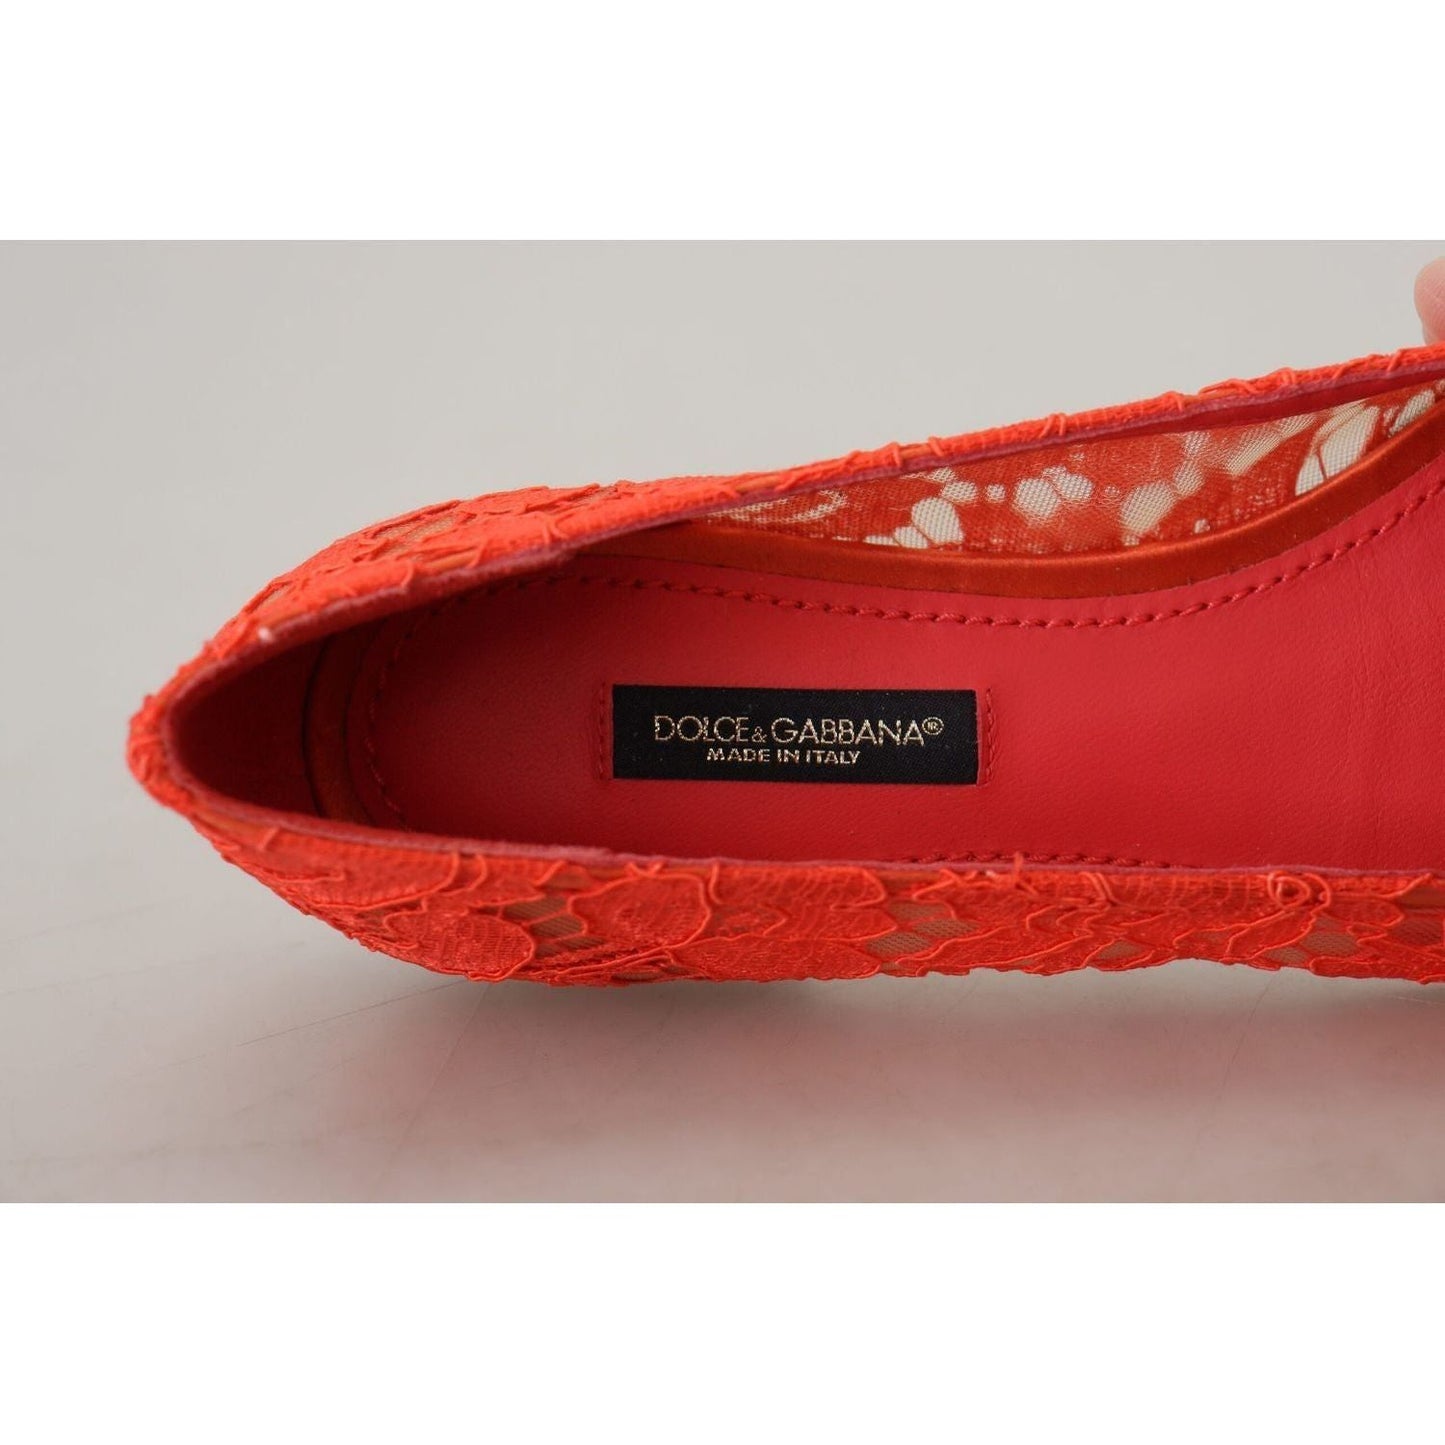 Dolce & Gabbana Elegant Lace Vally Flats in Coral Red red-taormina-lace-crystals-ballet-flats-shoes IMG_4972-scaled-3e1c7c59-3f9.jpg